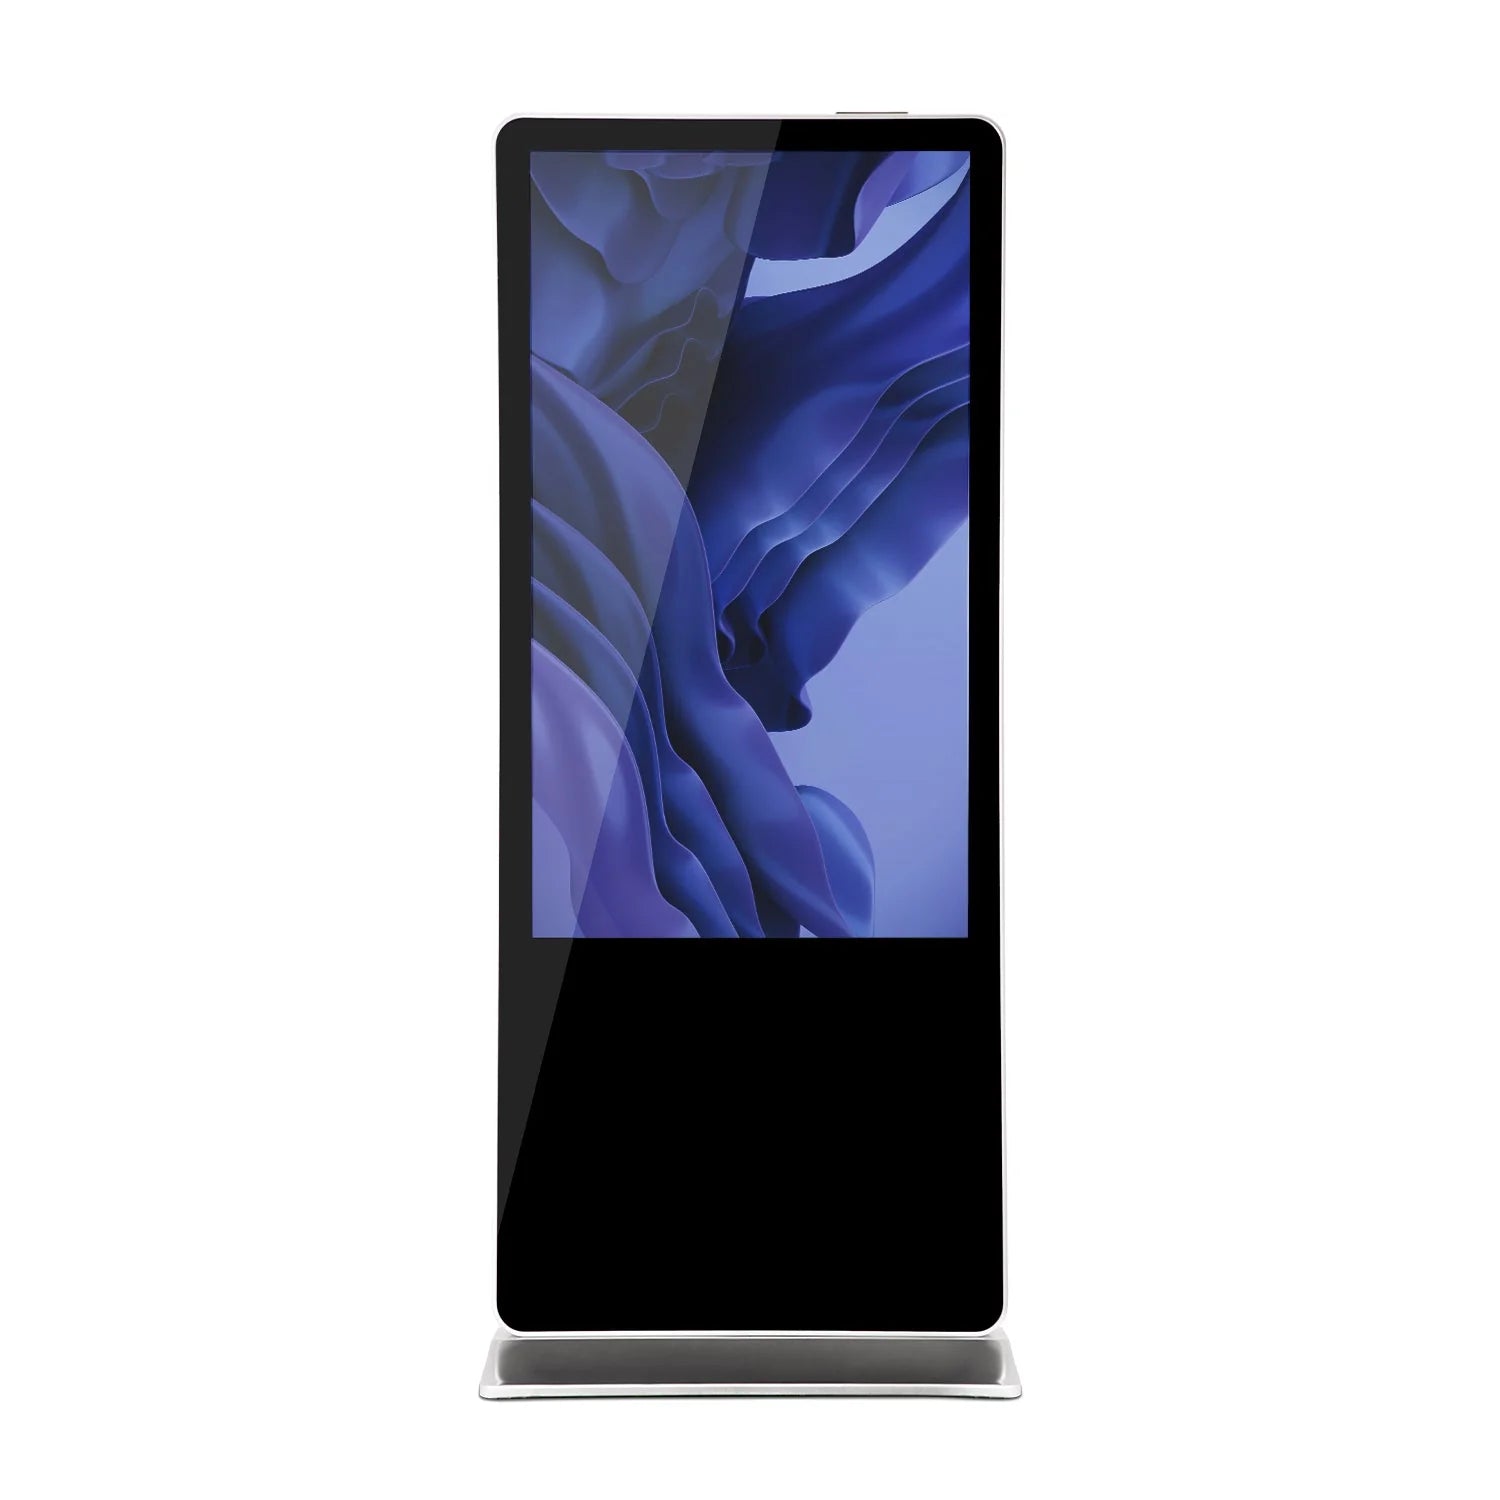 LEDSCOPIC Vertical 4K Touch Screen Kiosk: Offering Three Display Options